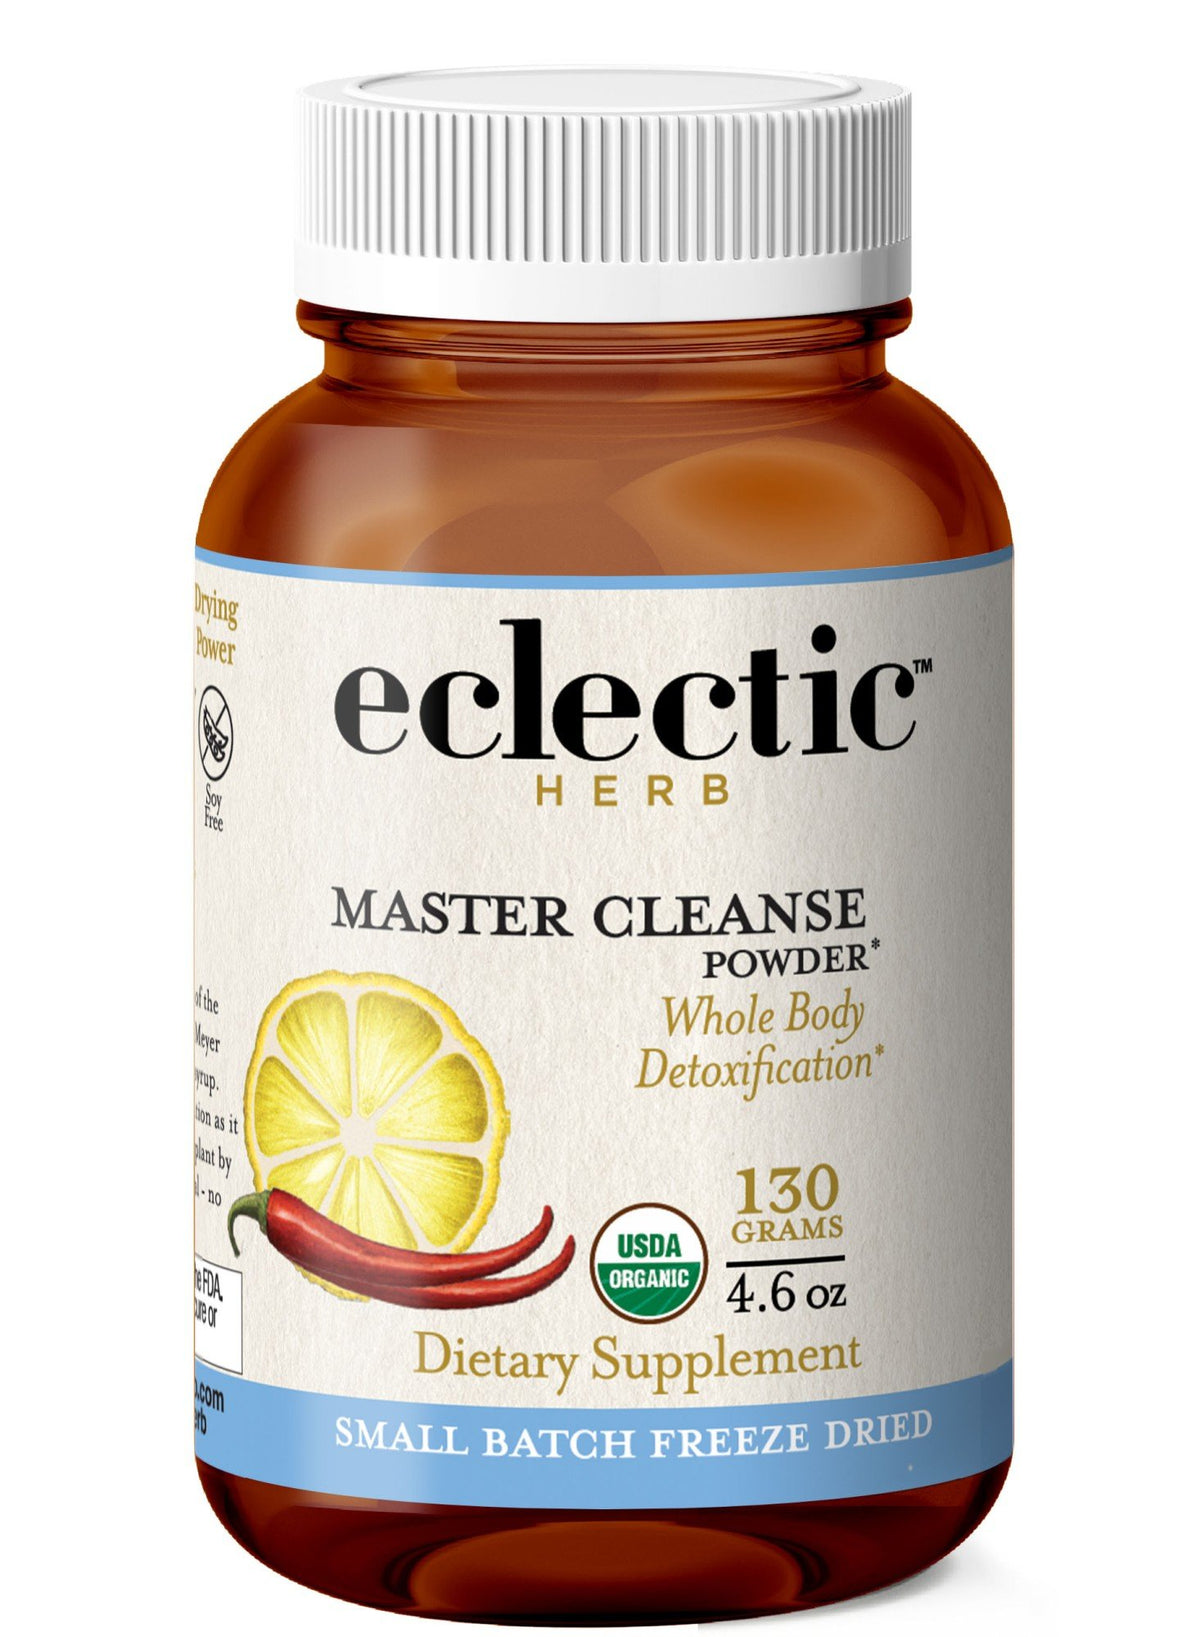 Eclectic Herb Master Cleanse Powder 130 g Powder